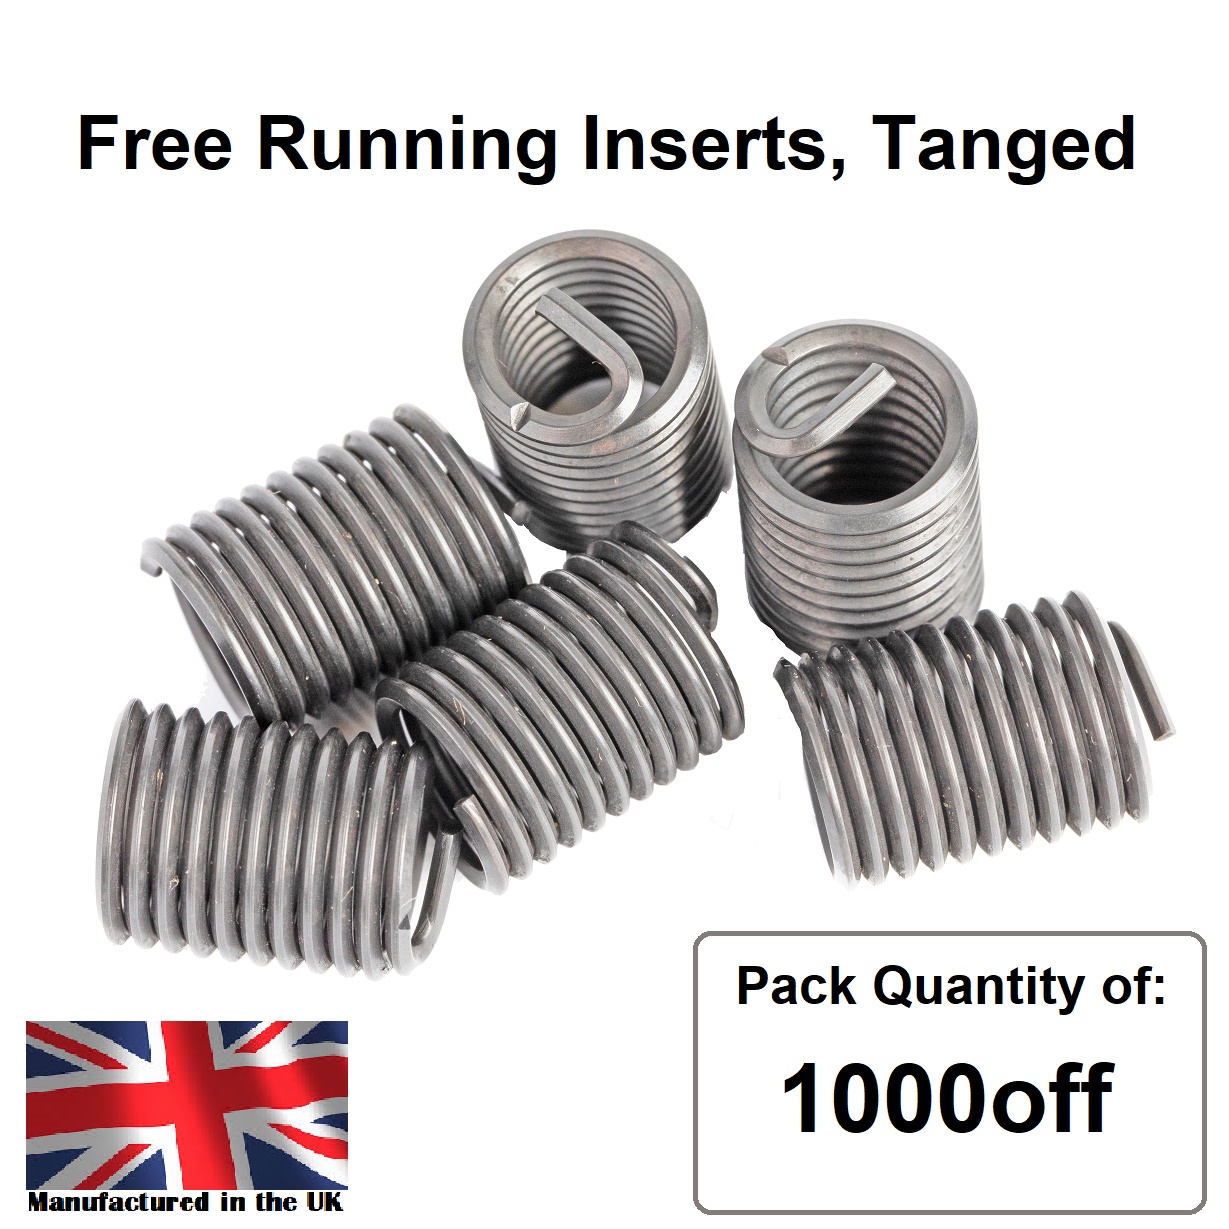 M8 x 1.25 x 1D Metric Coarse, Free Running, Tanged, Wire Thread Repair Insert, 304/A2 Stainless (Pack 1000)